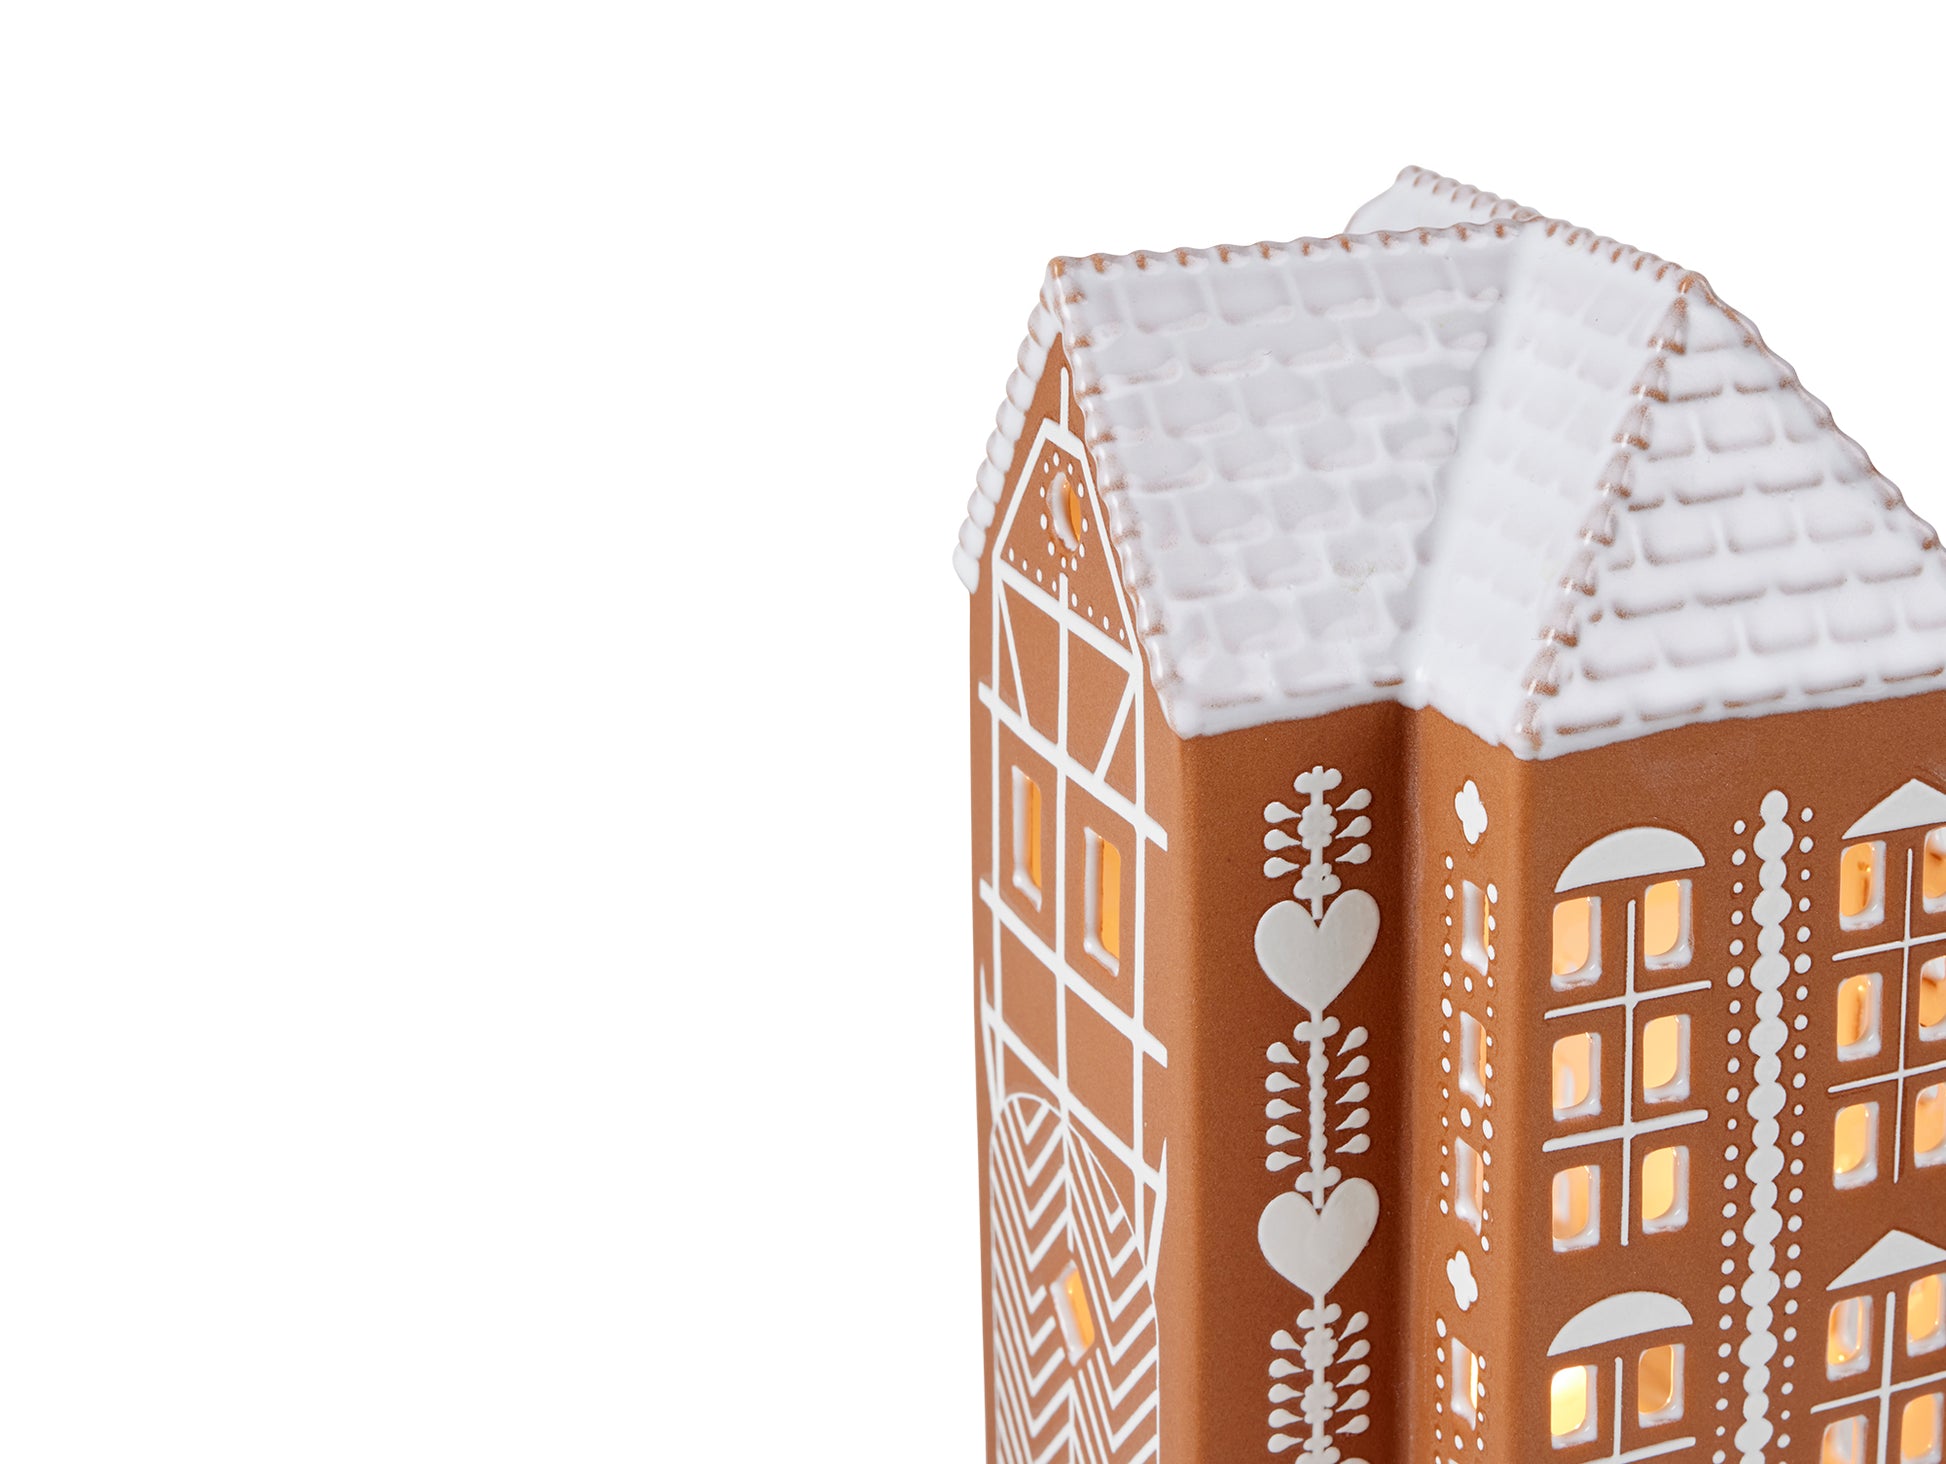 Gingerbread Lighthouse by Kähler - Large (Height: 17 cm)